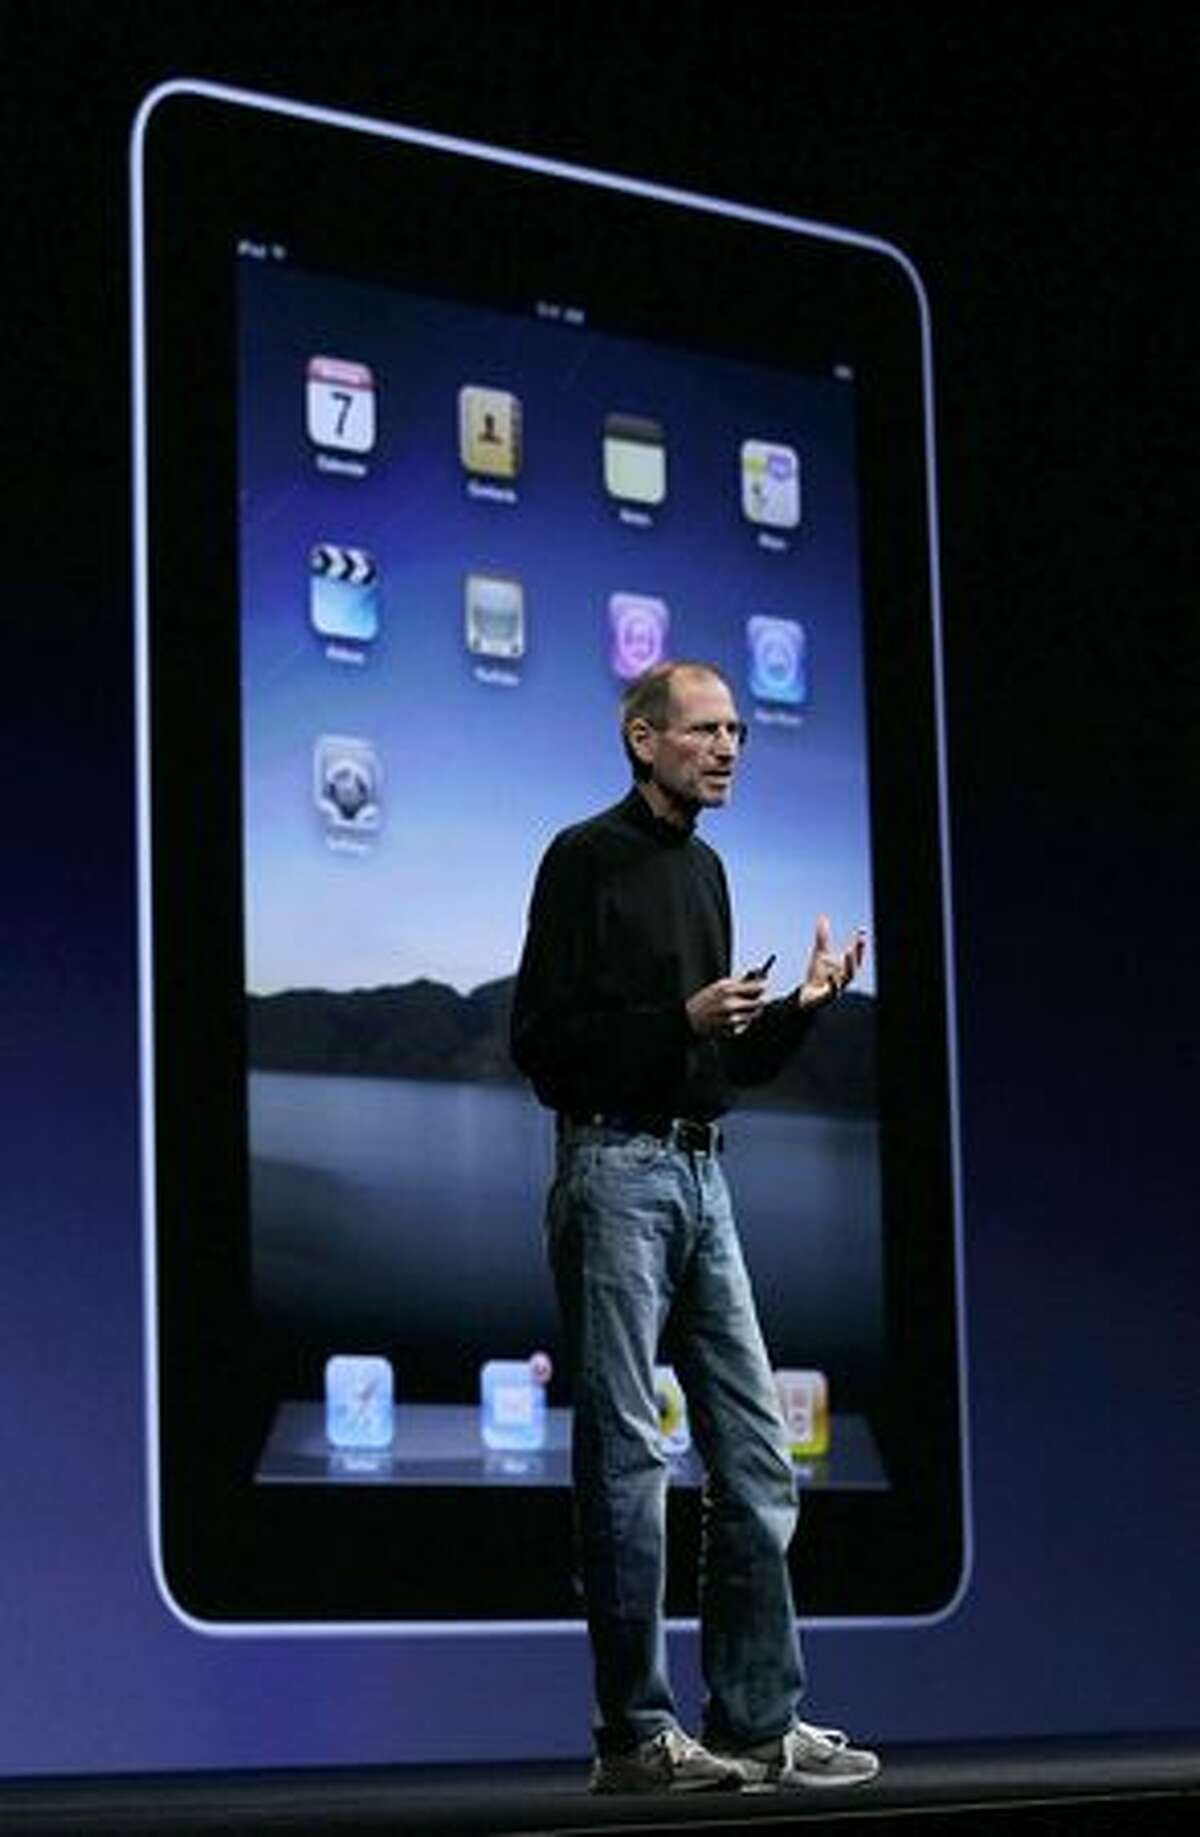 Apple CEO Steve Jobs talks about the iPad before showing the new iPhone during his opening keynote at the 2010 Apple Worldwide Developers conference June 7, 2010, in San Francisco.